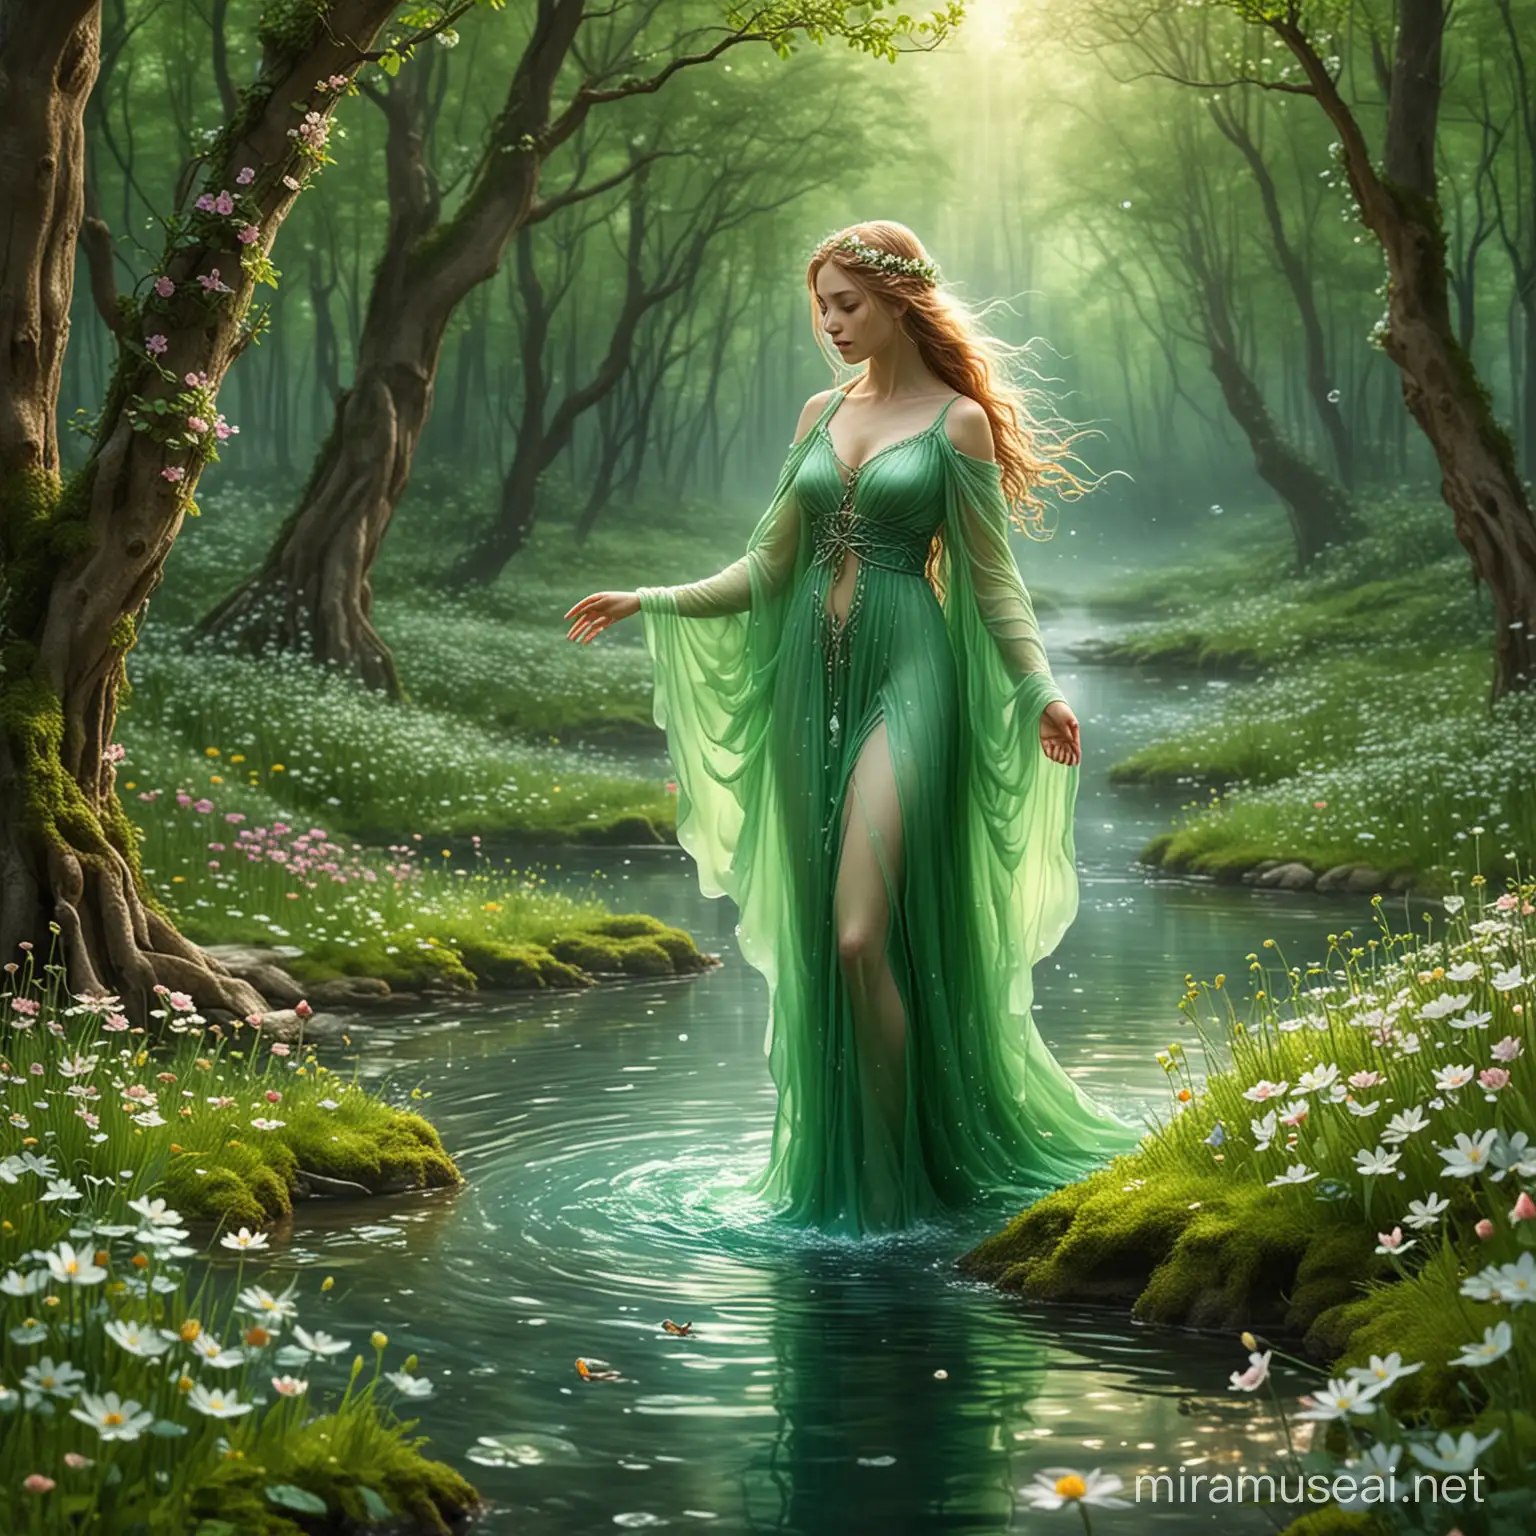 Enchanting Water Spirit Surrounded by Spring Blossoms in Lush Green Forest